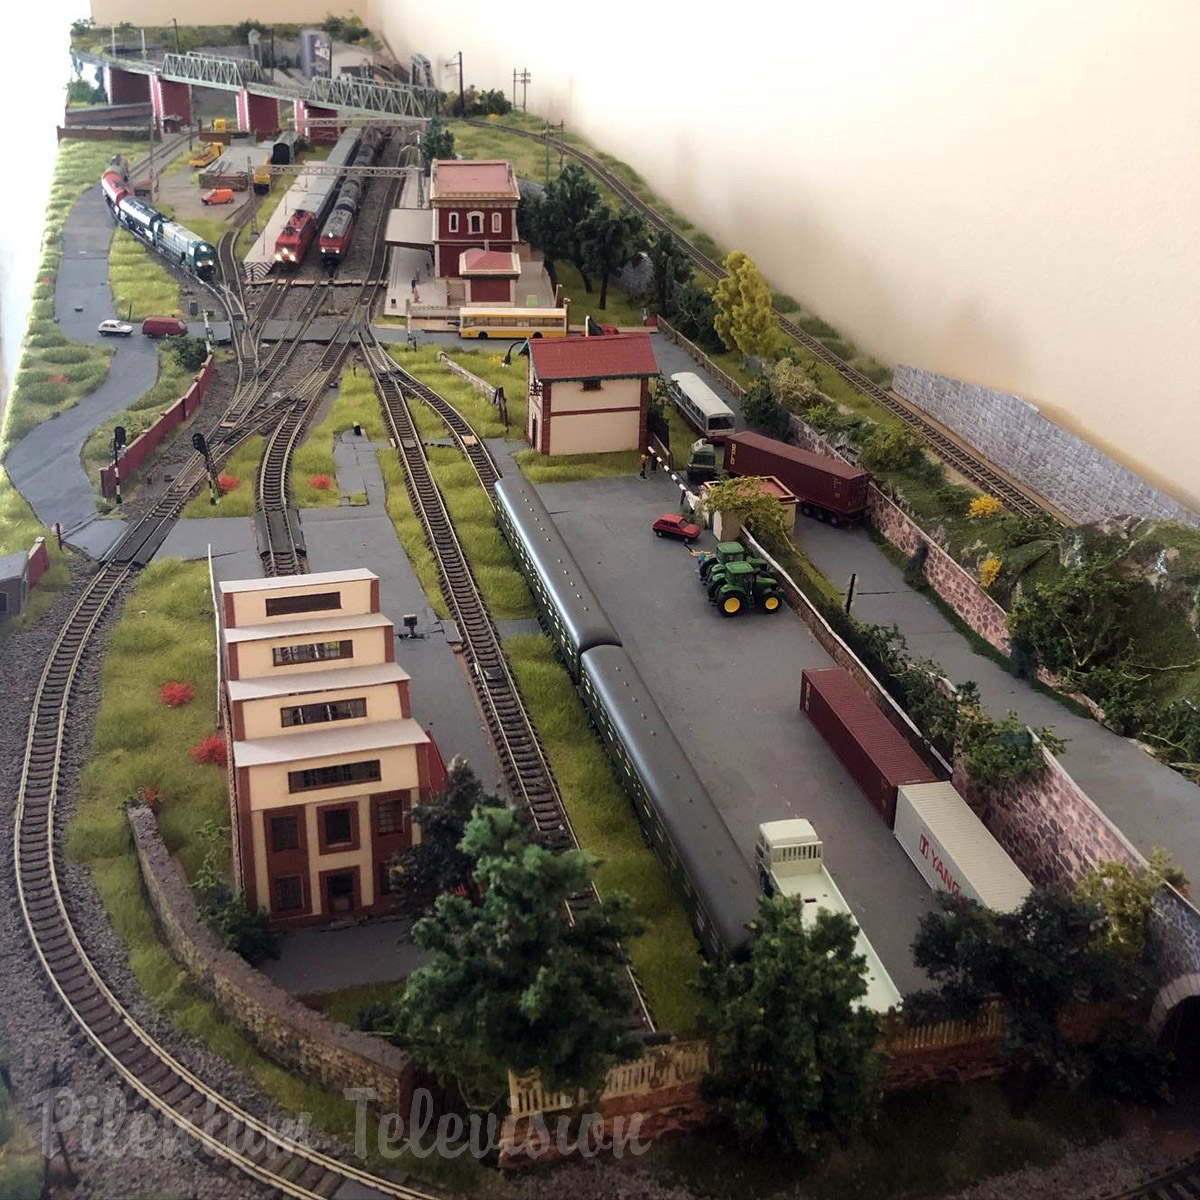 Model Train Layout - Overall View